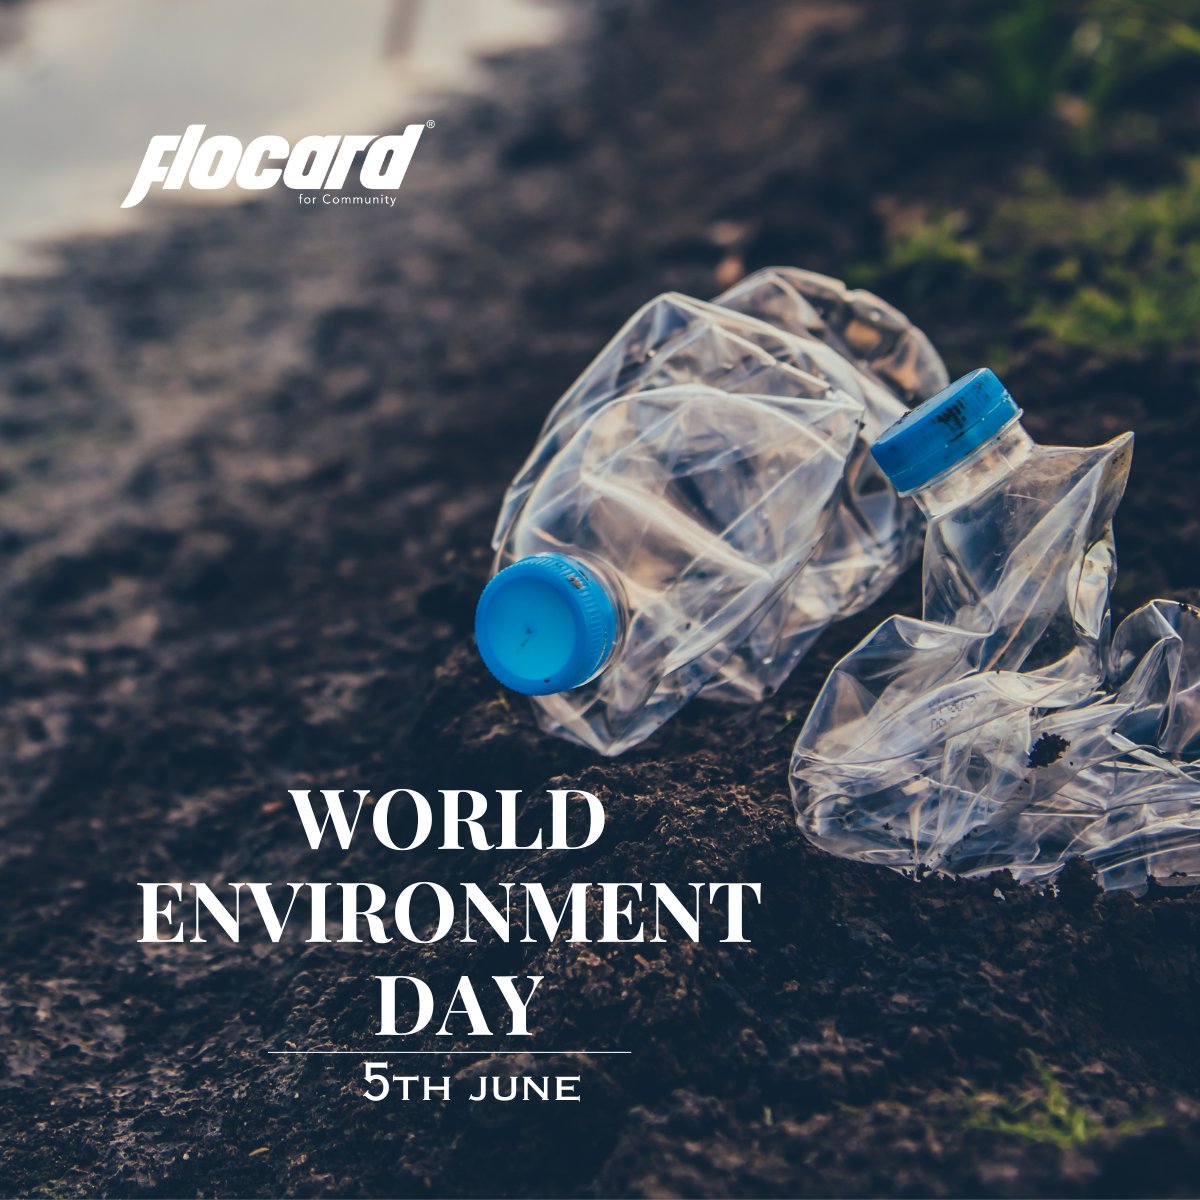 𝐖𝐨𝐫𝐥𝐝 𝐄𝐧𝐯𝐢𝐫𝐨𝐧𝐦𝐞𝐧𝐭 𝐃𝐚𝐲 2023: #BeatPlasticPollution 

Every year, we produce over 400 million tonnes of plastic. 
#EnvironmentDay #WorldEnvironmentDay2023  #PlasticPollution #Climate #Sustainability #EnvironmentDay23